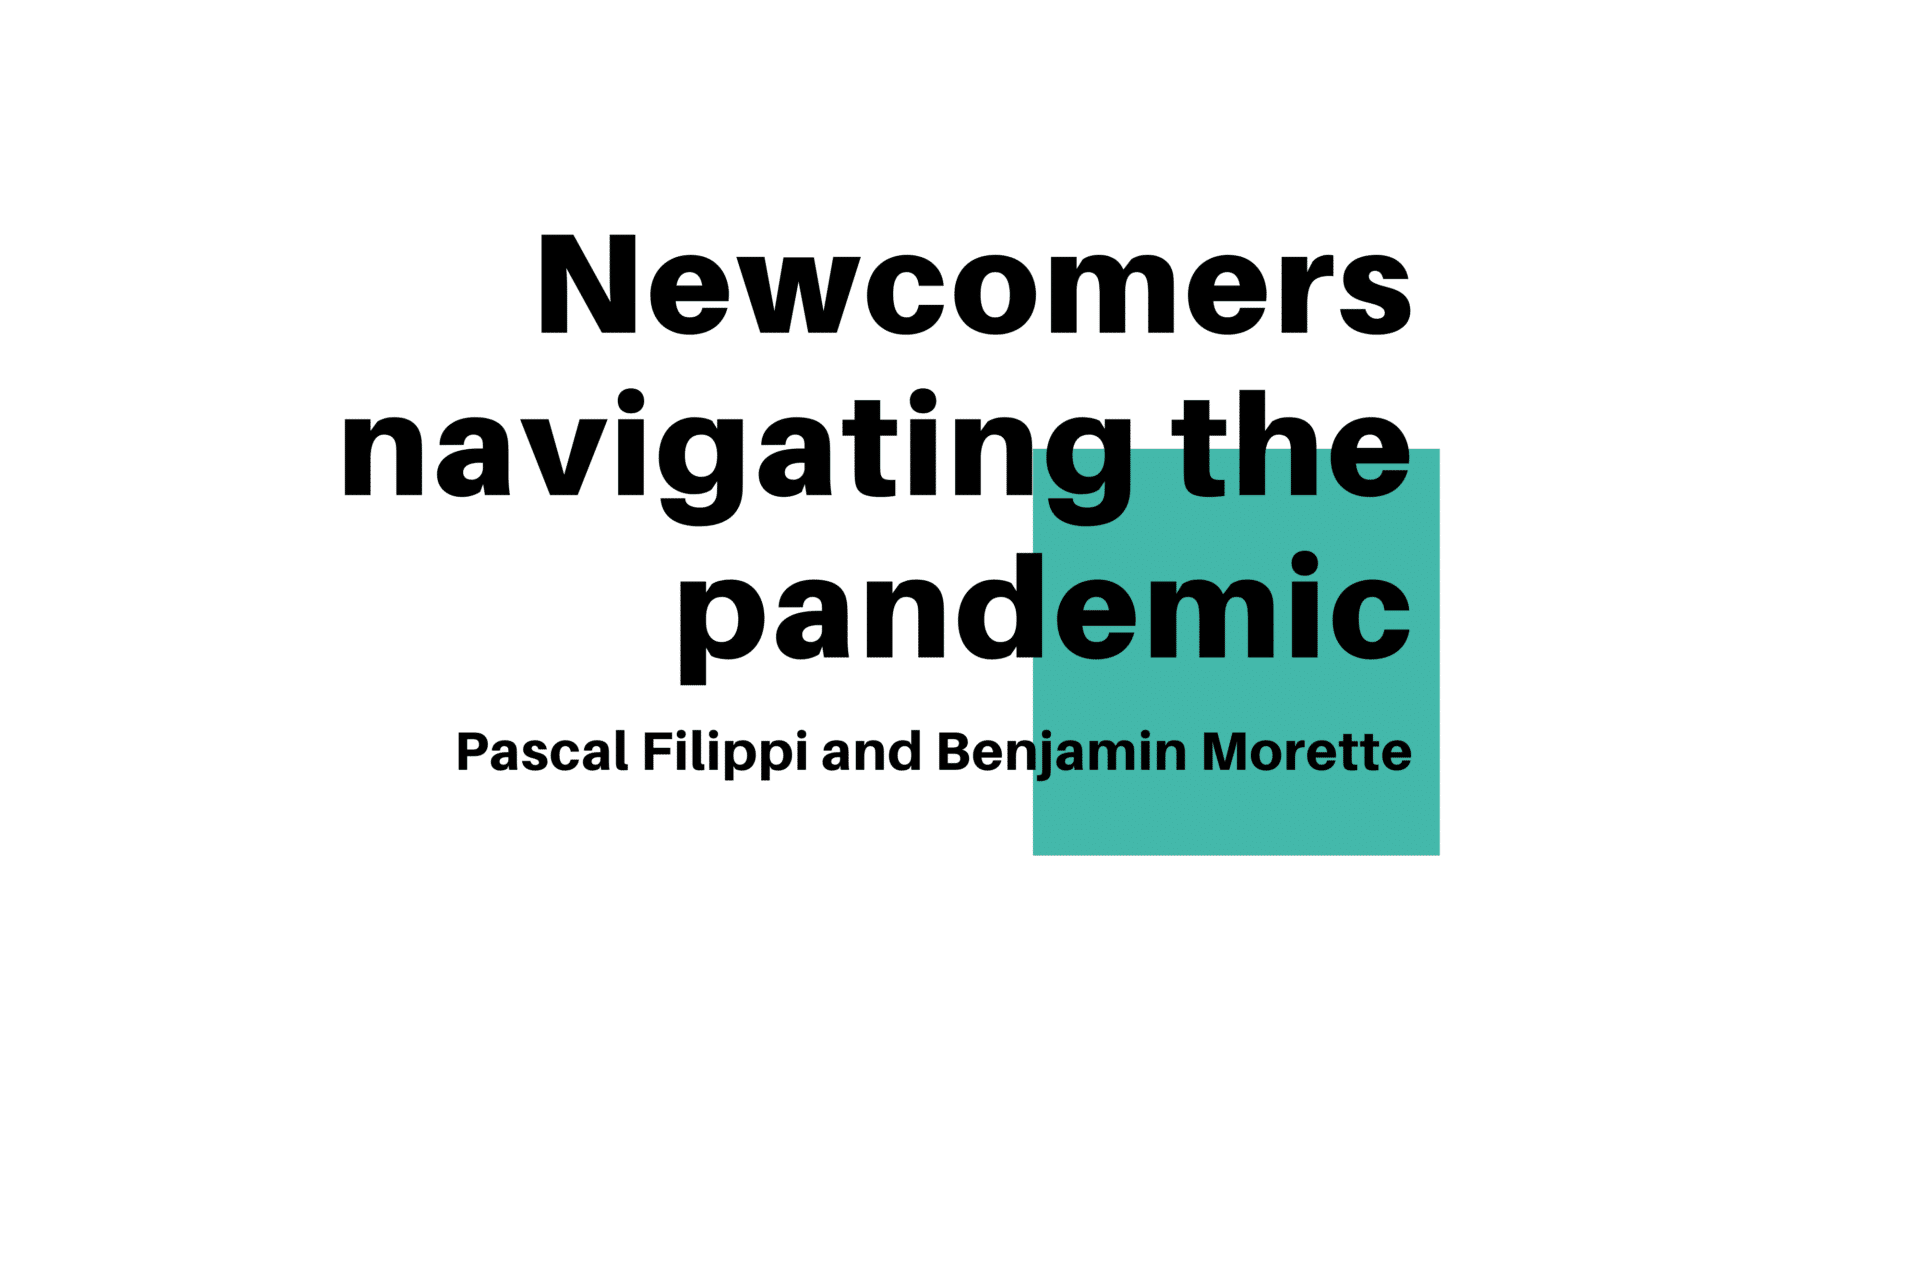 Local Journalism Initiative - Newcomers navigating the pandemic title card